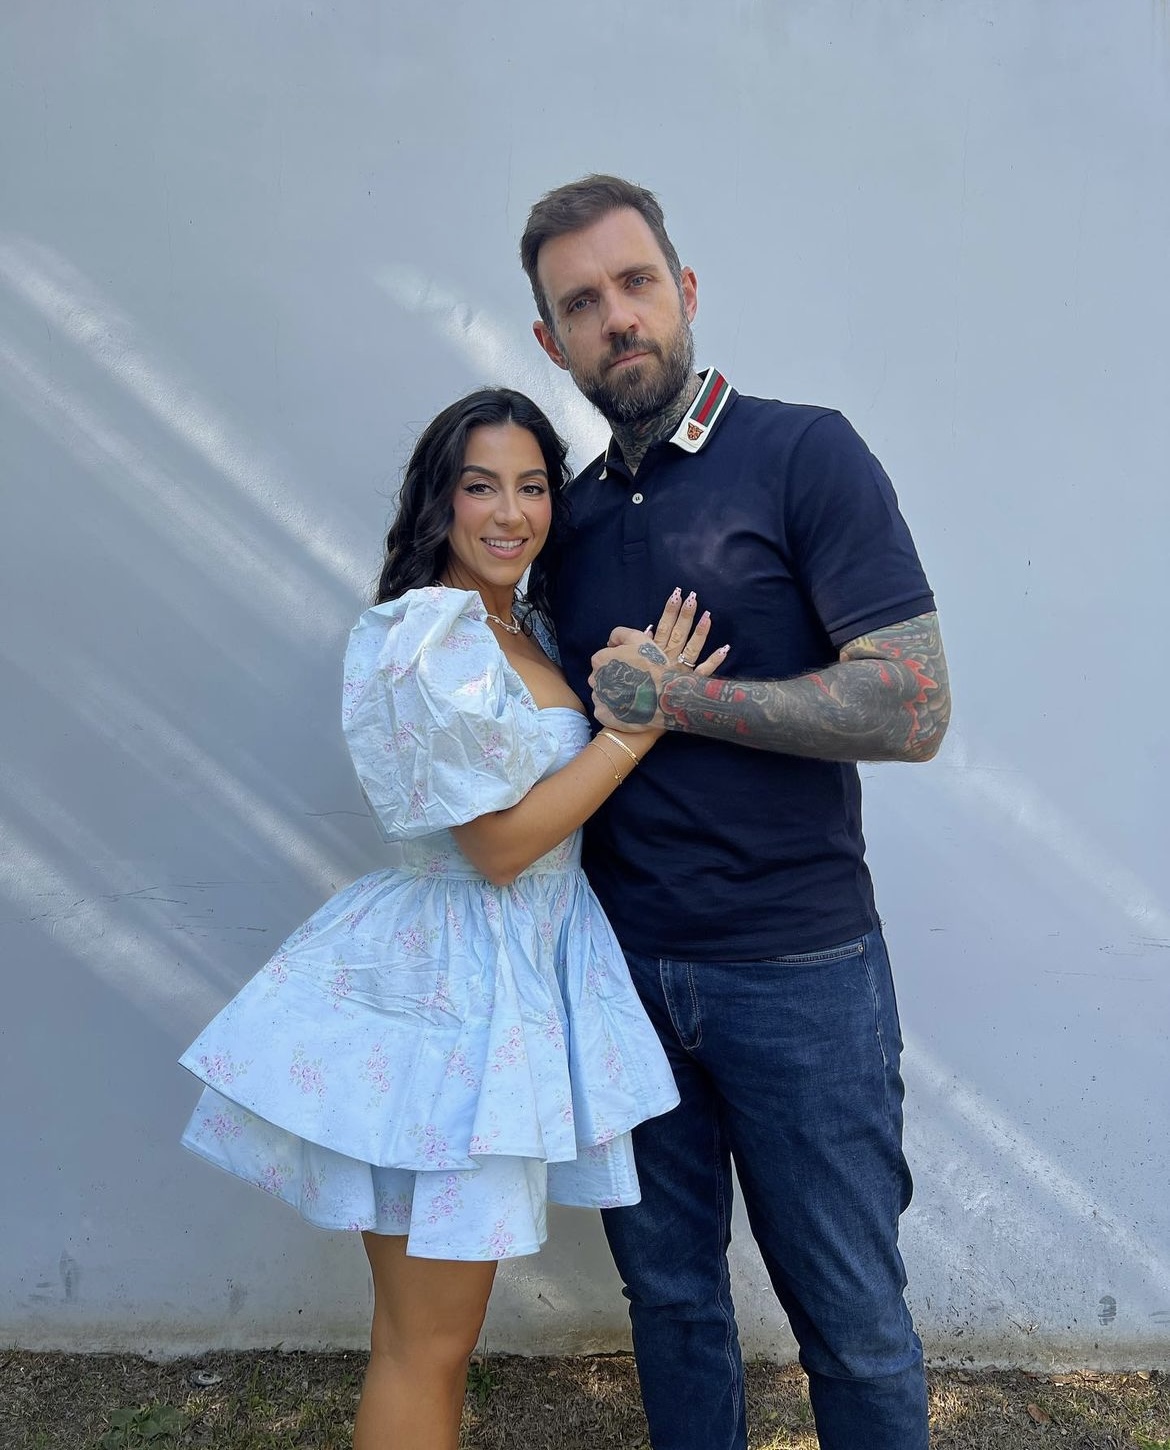 Media Personality Adam22 Addresses Backlash Over Wife Lena The Plugs Recent Sex Tape W Another 